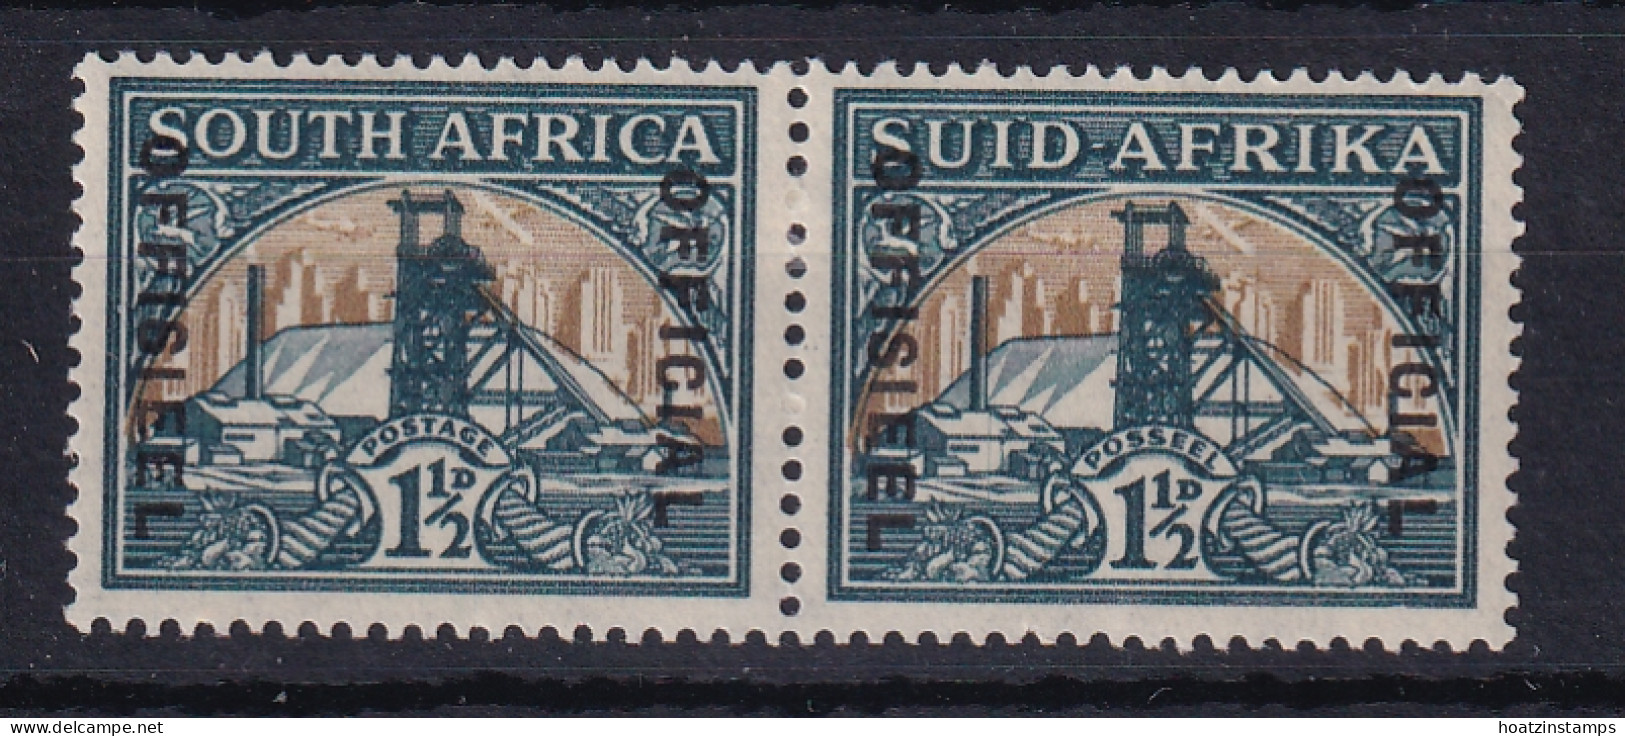 South Africa: 1935/49   Official - Goldmine   SG O22aw    1½d   Green & Bright Gold  [Wmk Upright]  MH Pair - Officials